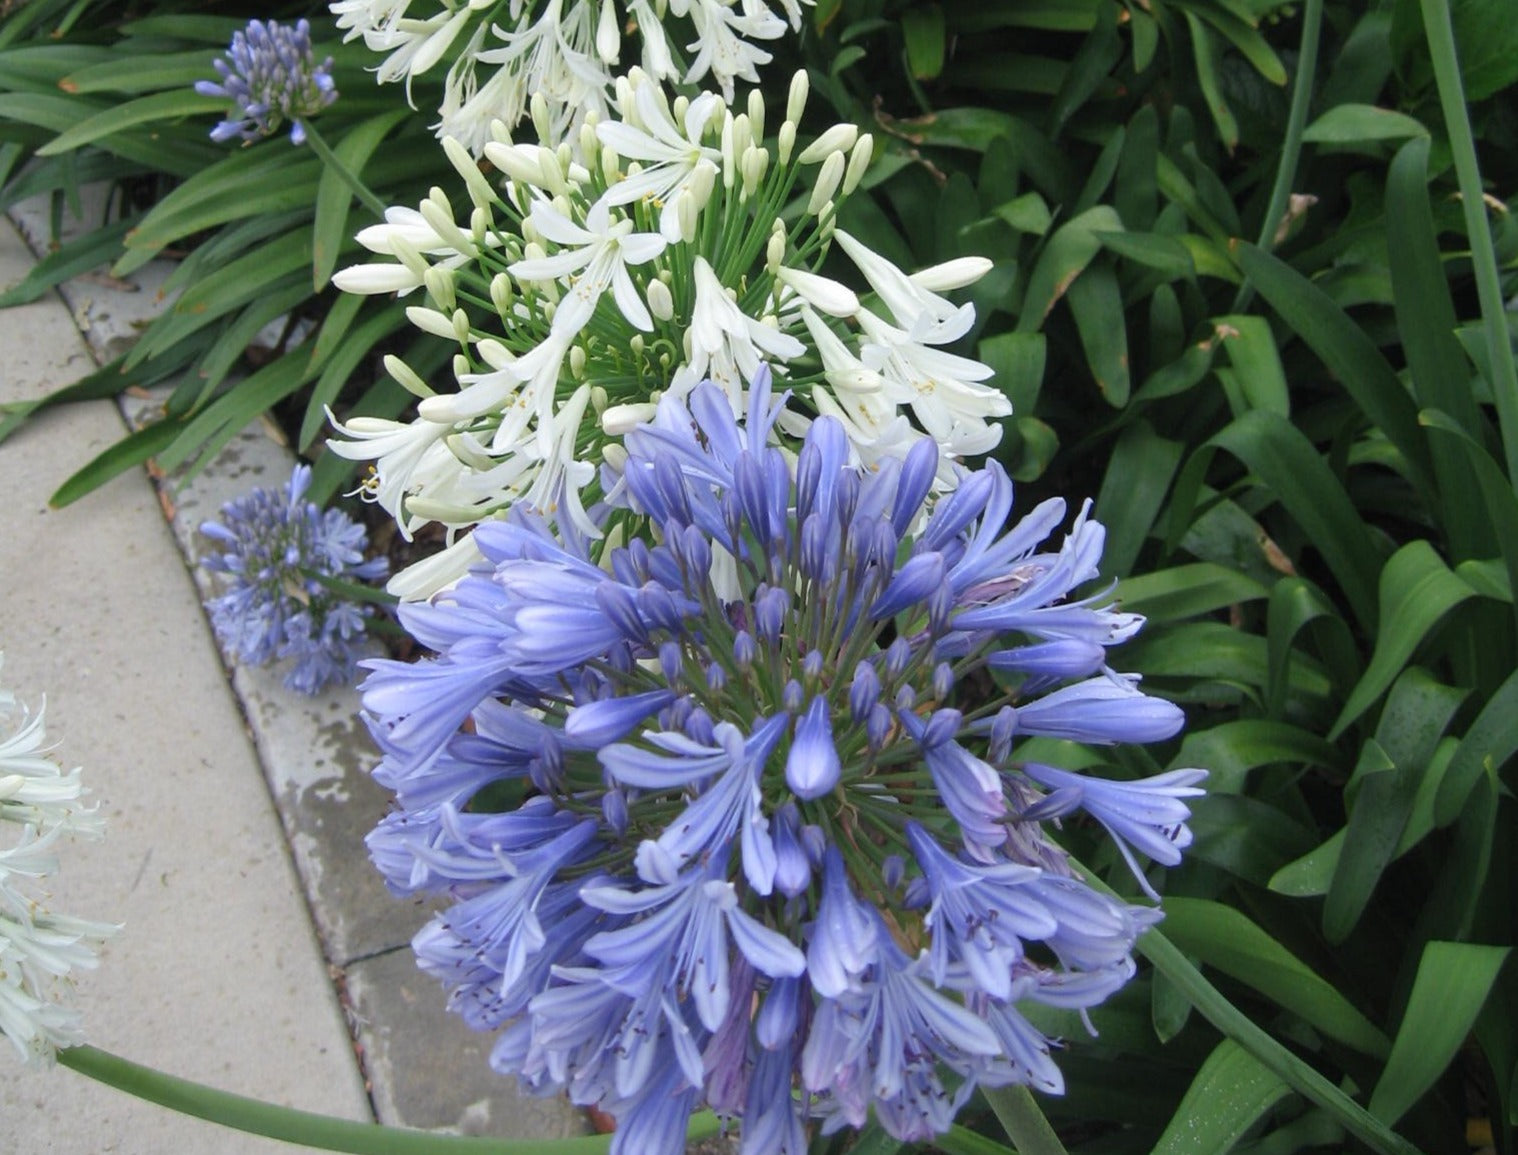 Agapanthus for Sale | Buy Online Aus | Plants in a Box